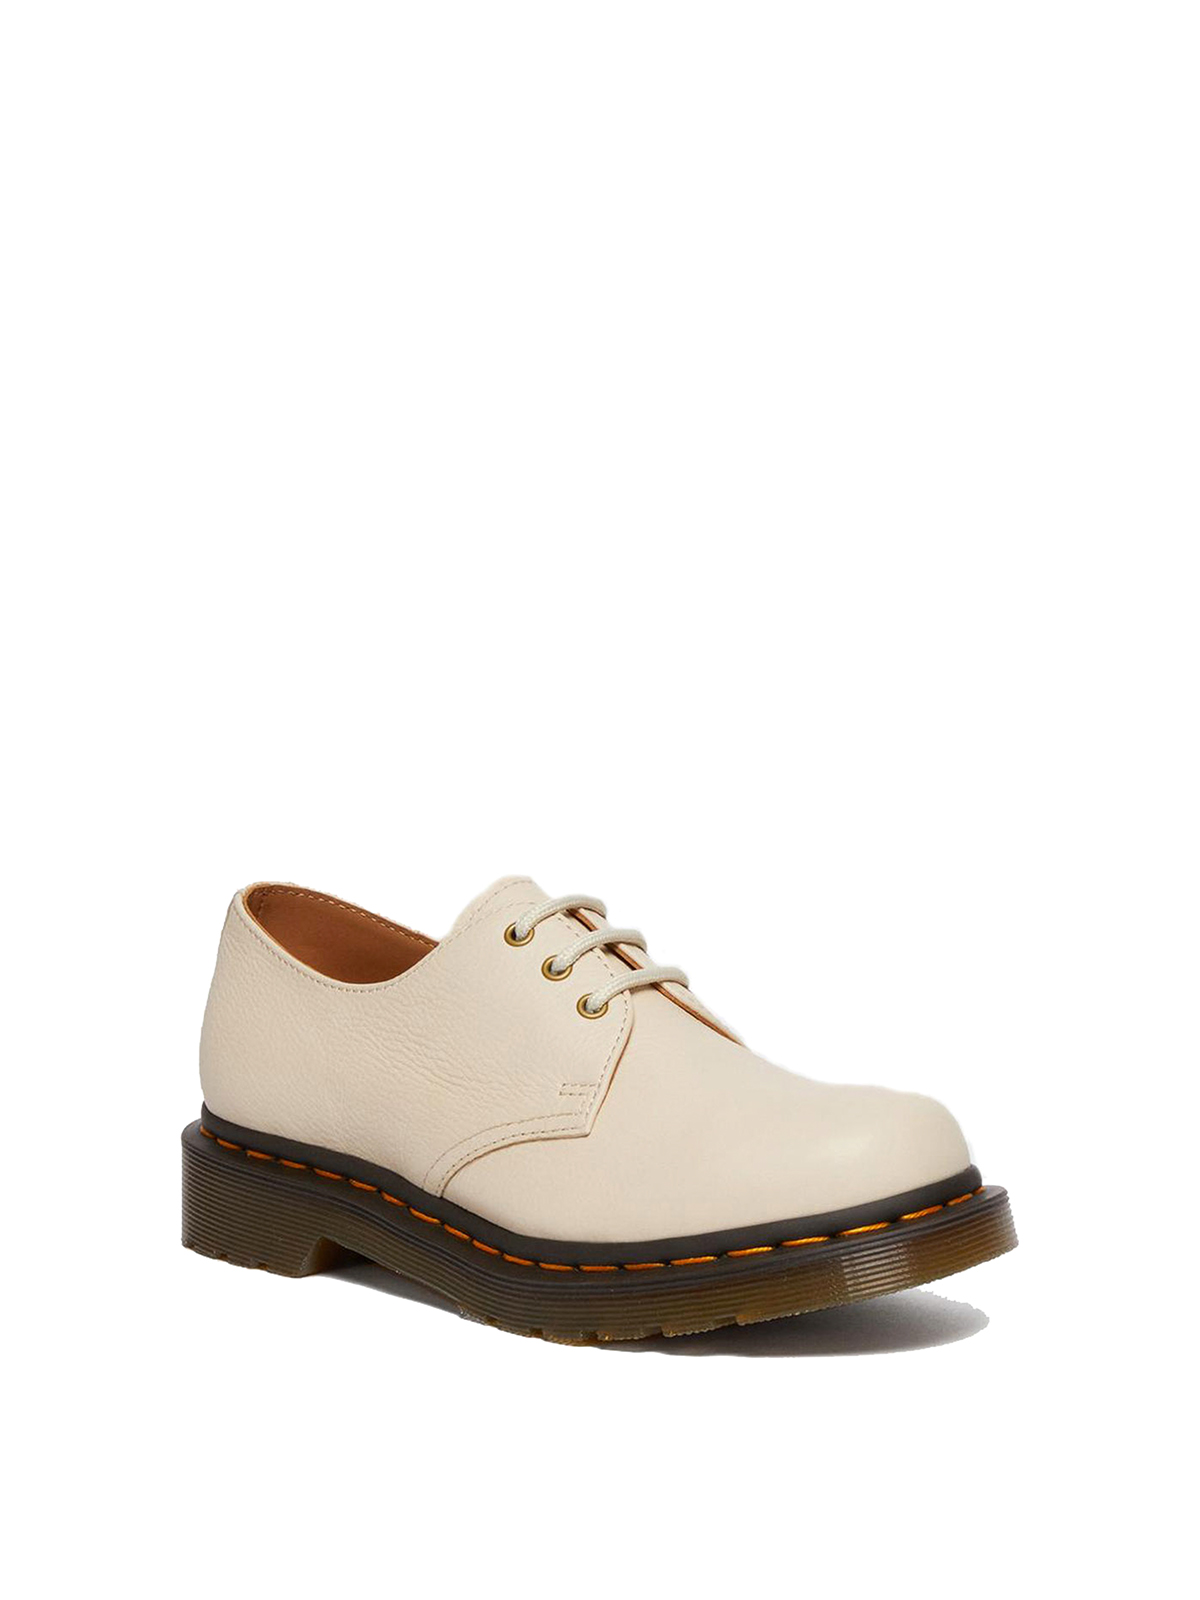 Dr. Martens' Leather Shoes In Yellow